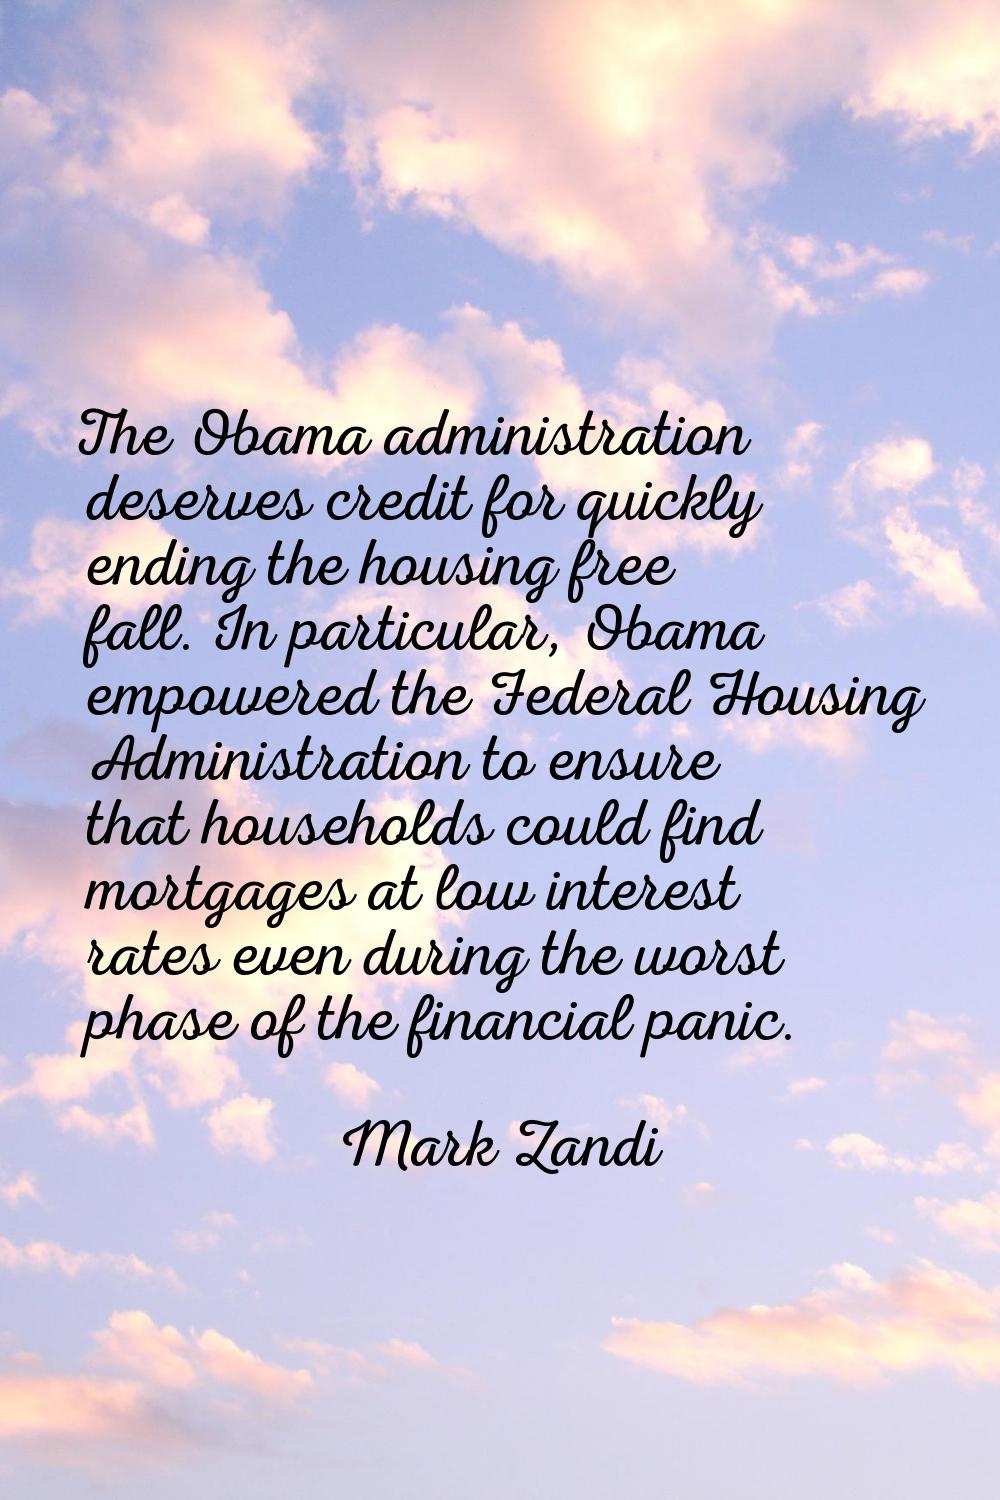 The Obama administration deserves credit for quickly ending the housing free fall. In particular, O